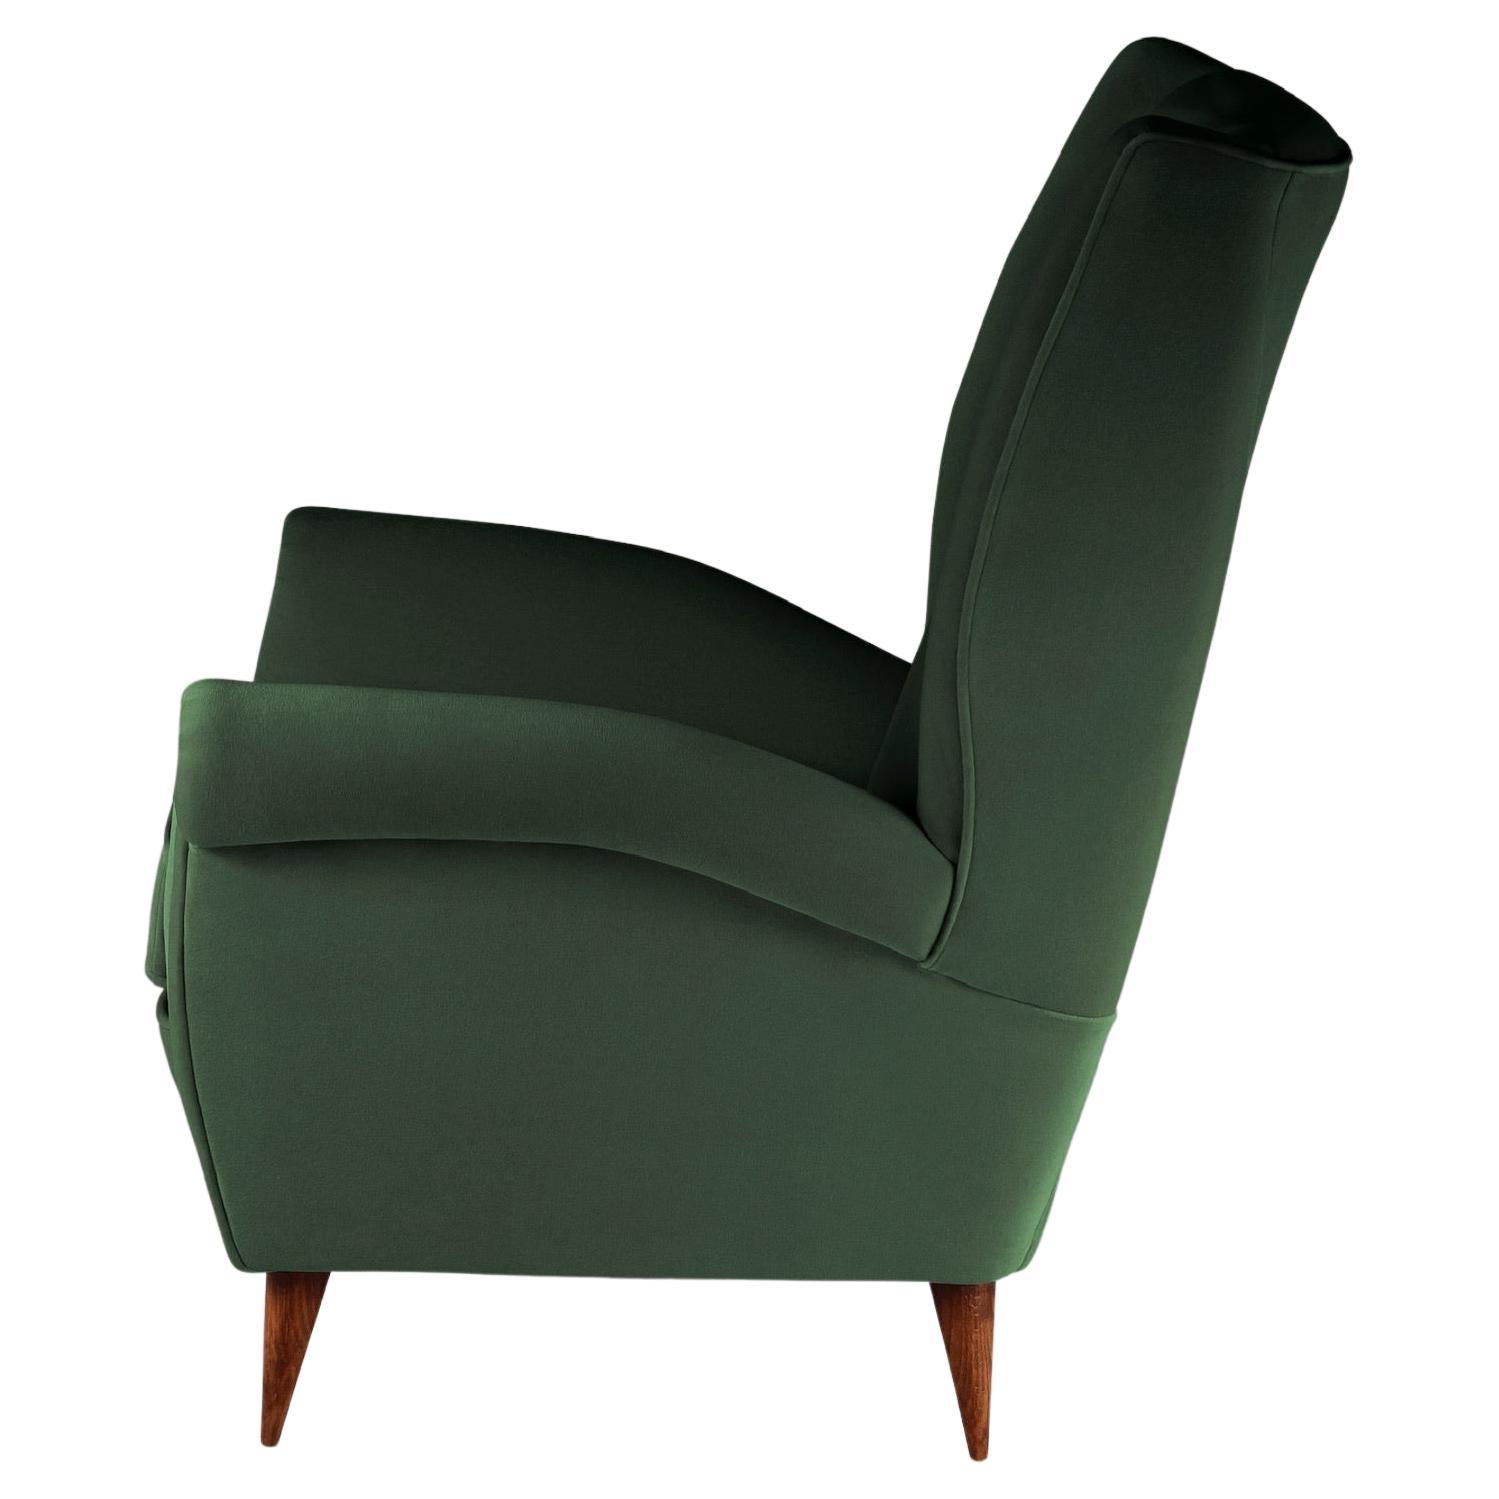 Pair of Mid-Century Modern Inspired Italian Style ‘Marcello’ Lounge Chairs